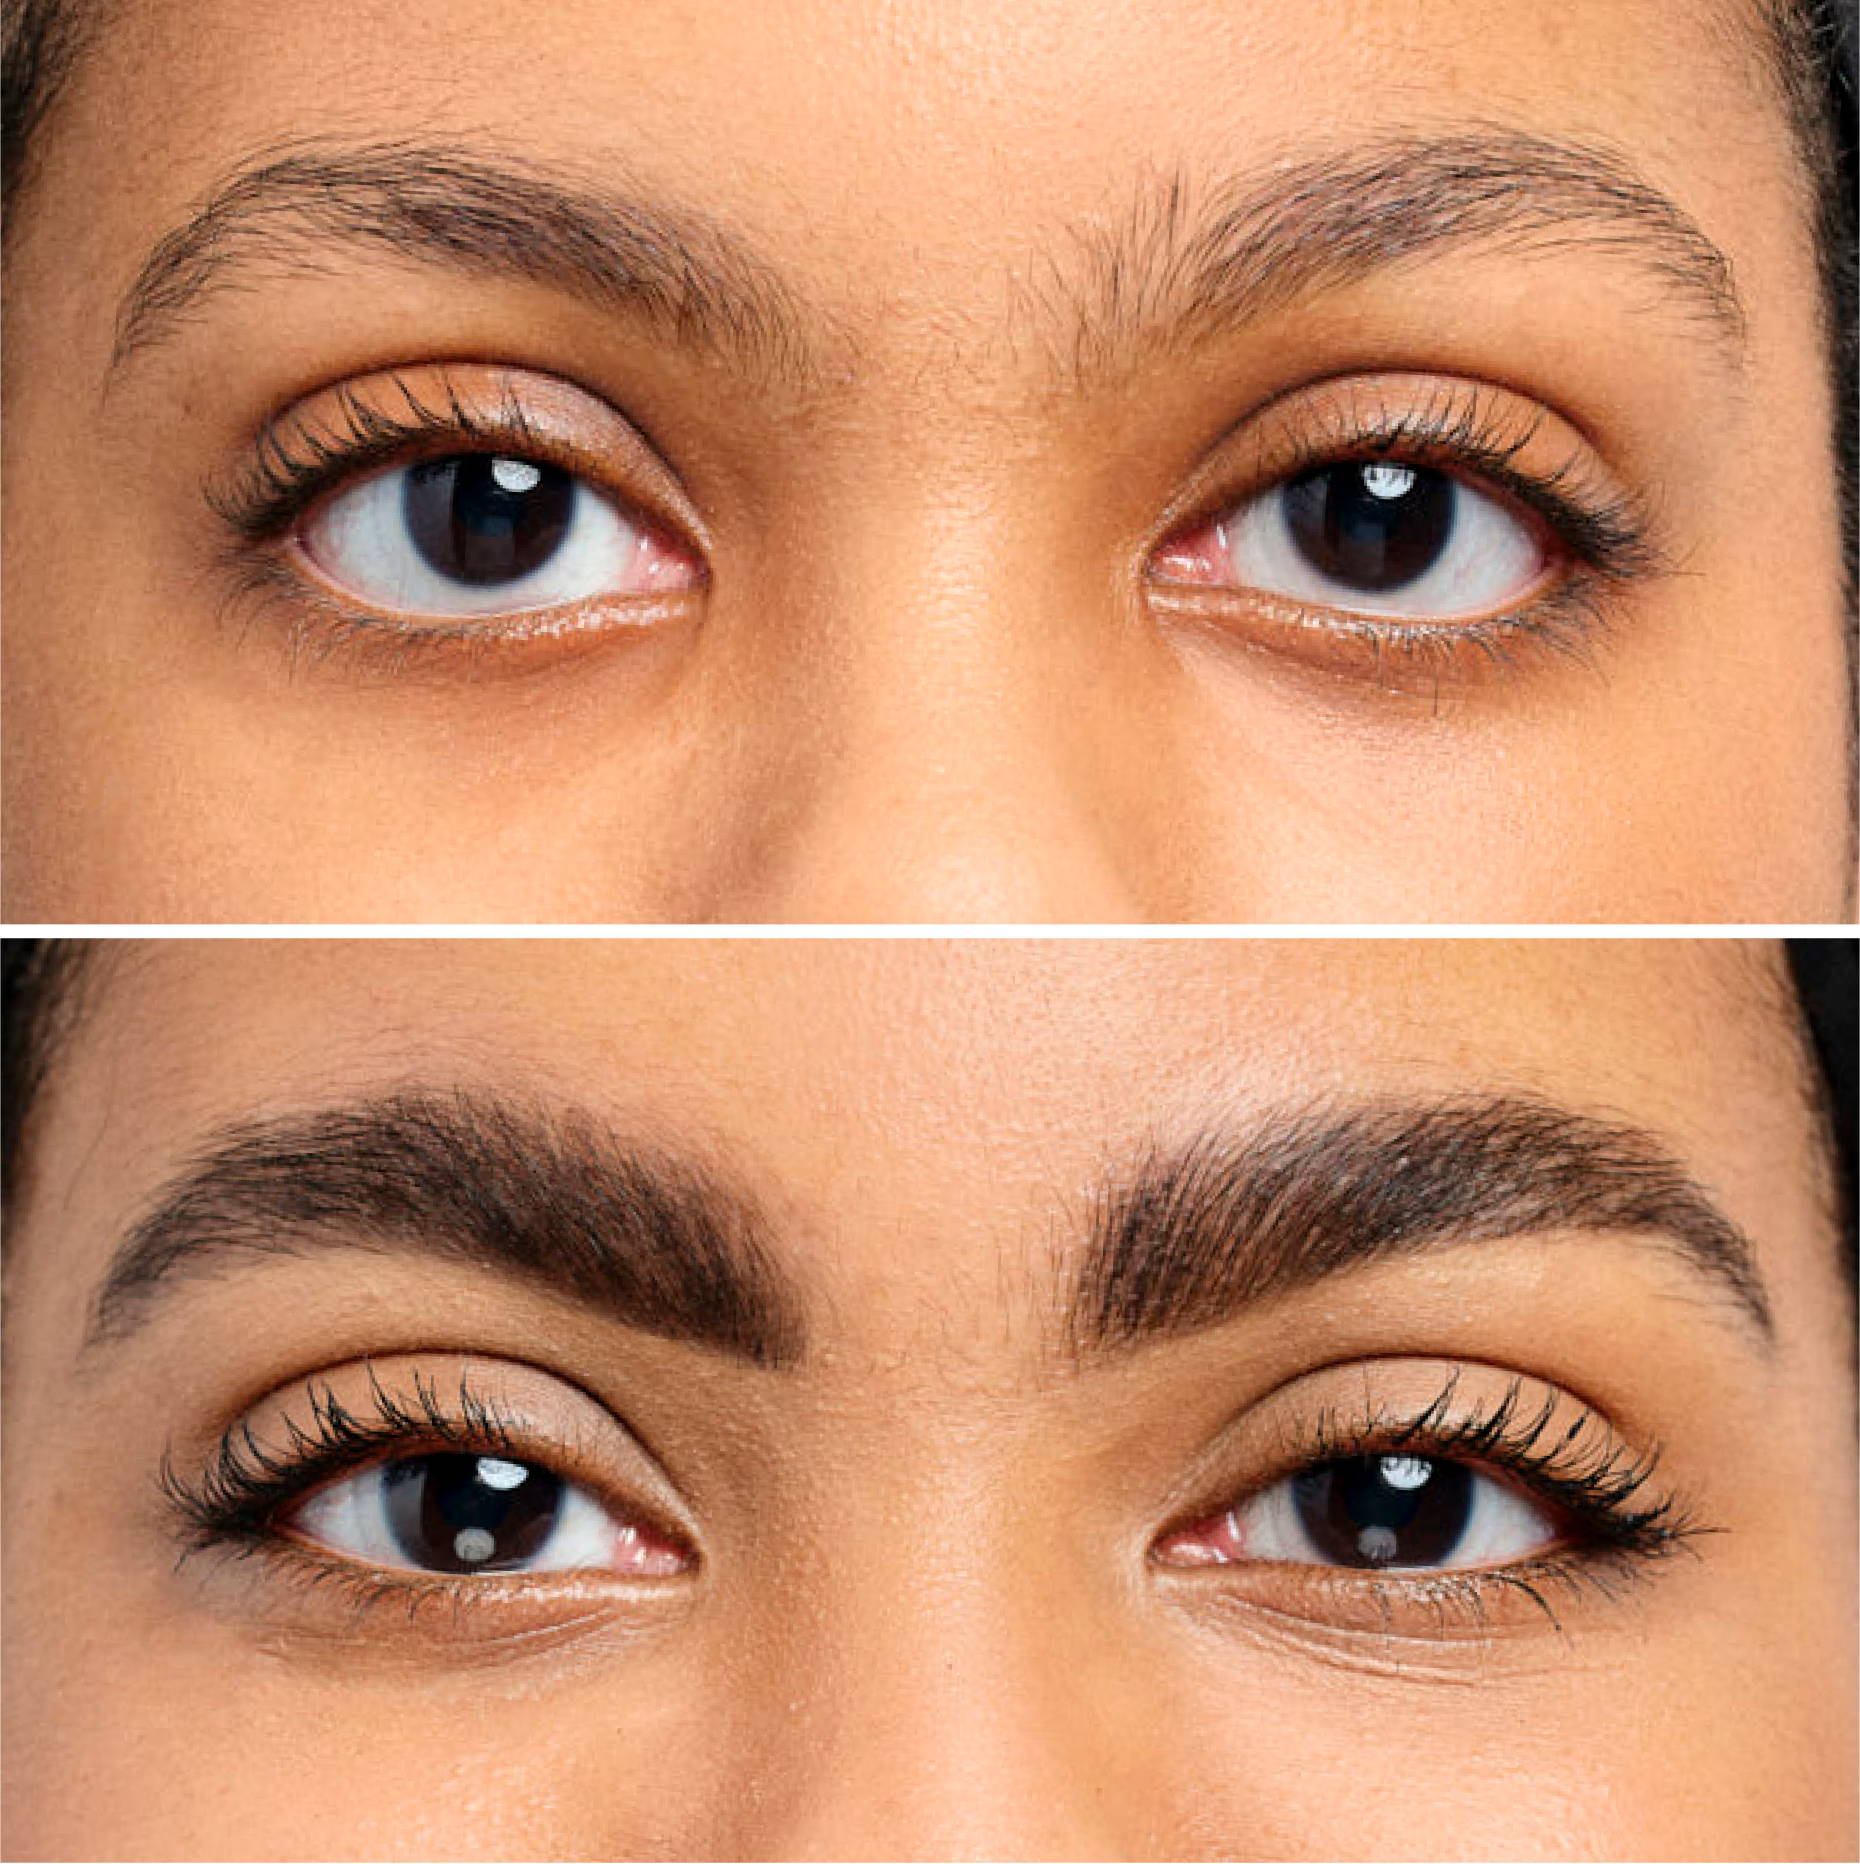 Before & after brow picture